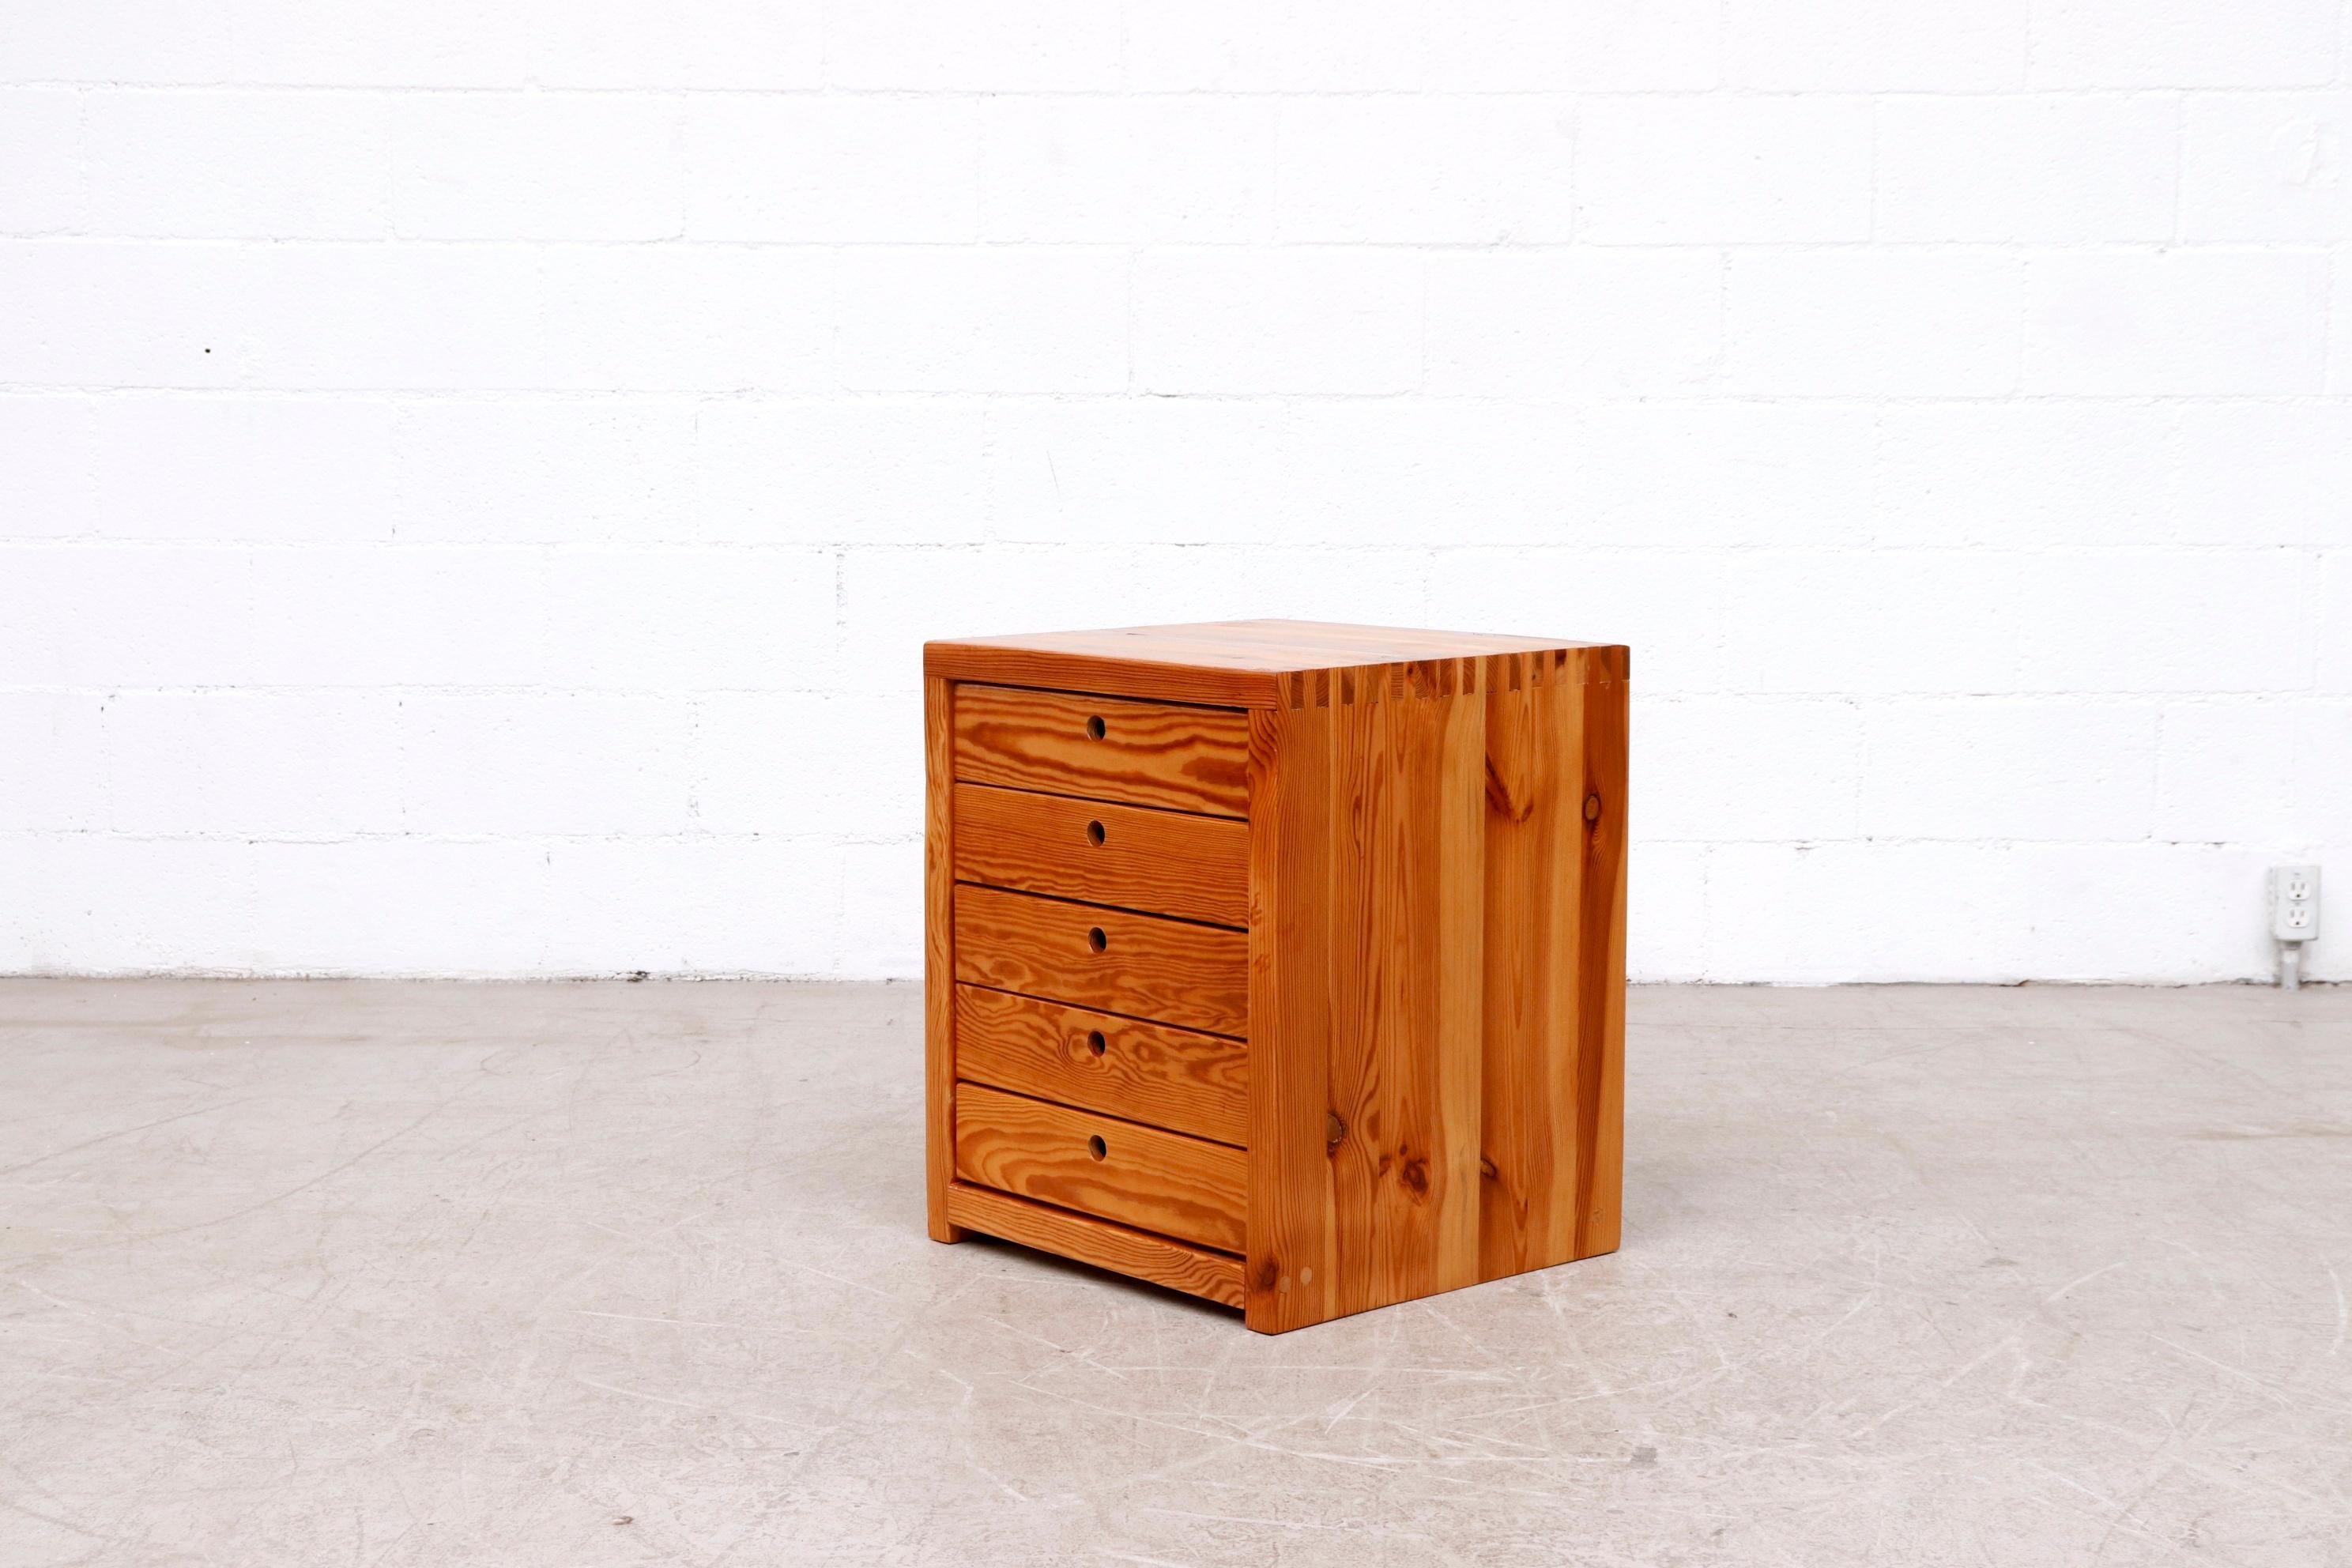 Beautiful Ate Van Apeldoorn small set of drawers or nightstand, lightly refinished pine. With cut-out pulls. In original condition with wear consistent with its age and use.